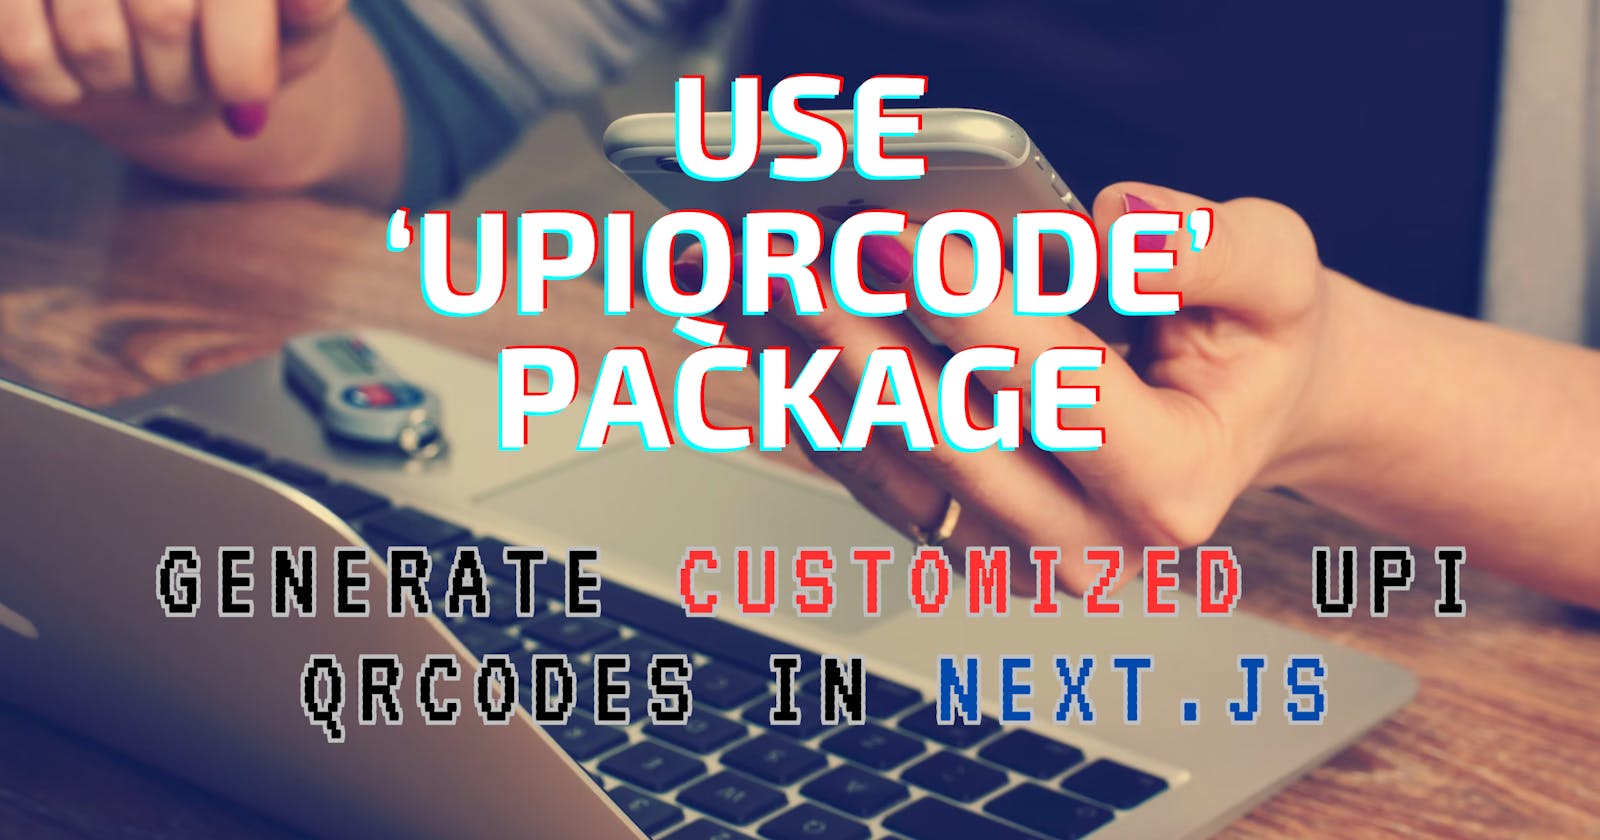 How to use 'upiqrcode'  package.